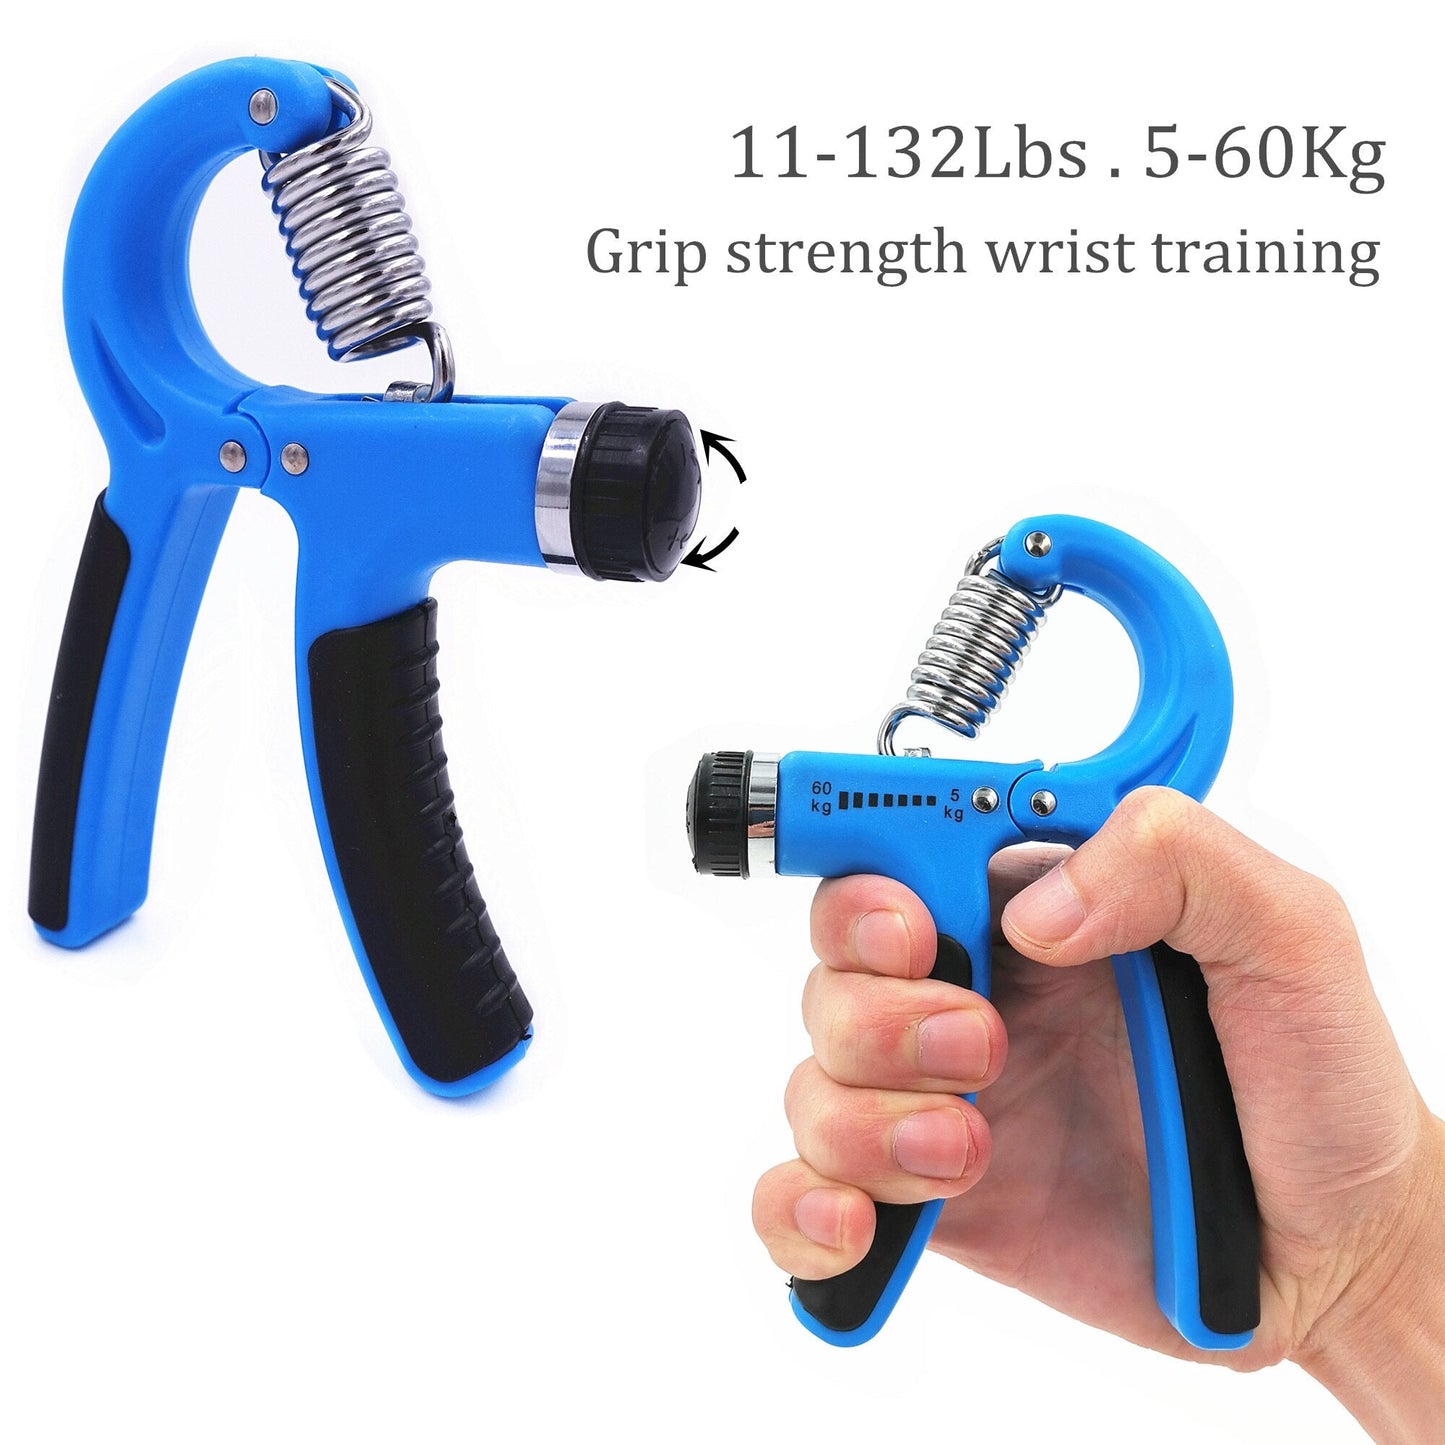 Hand-Grip-Strengthener-Workout-Kit-Adjustable-Hand-Gripper-Ring-Finger-Exerciser-Band-for-Rehabilitation-and-Stress-Relief-Ball